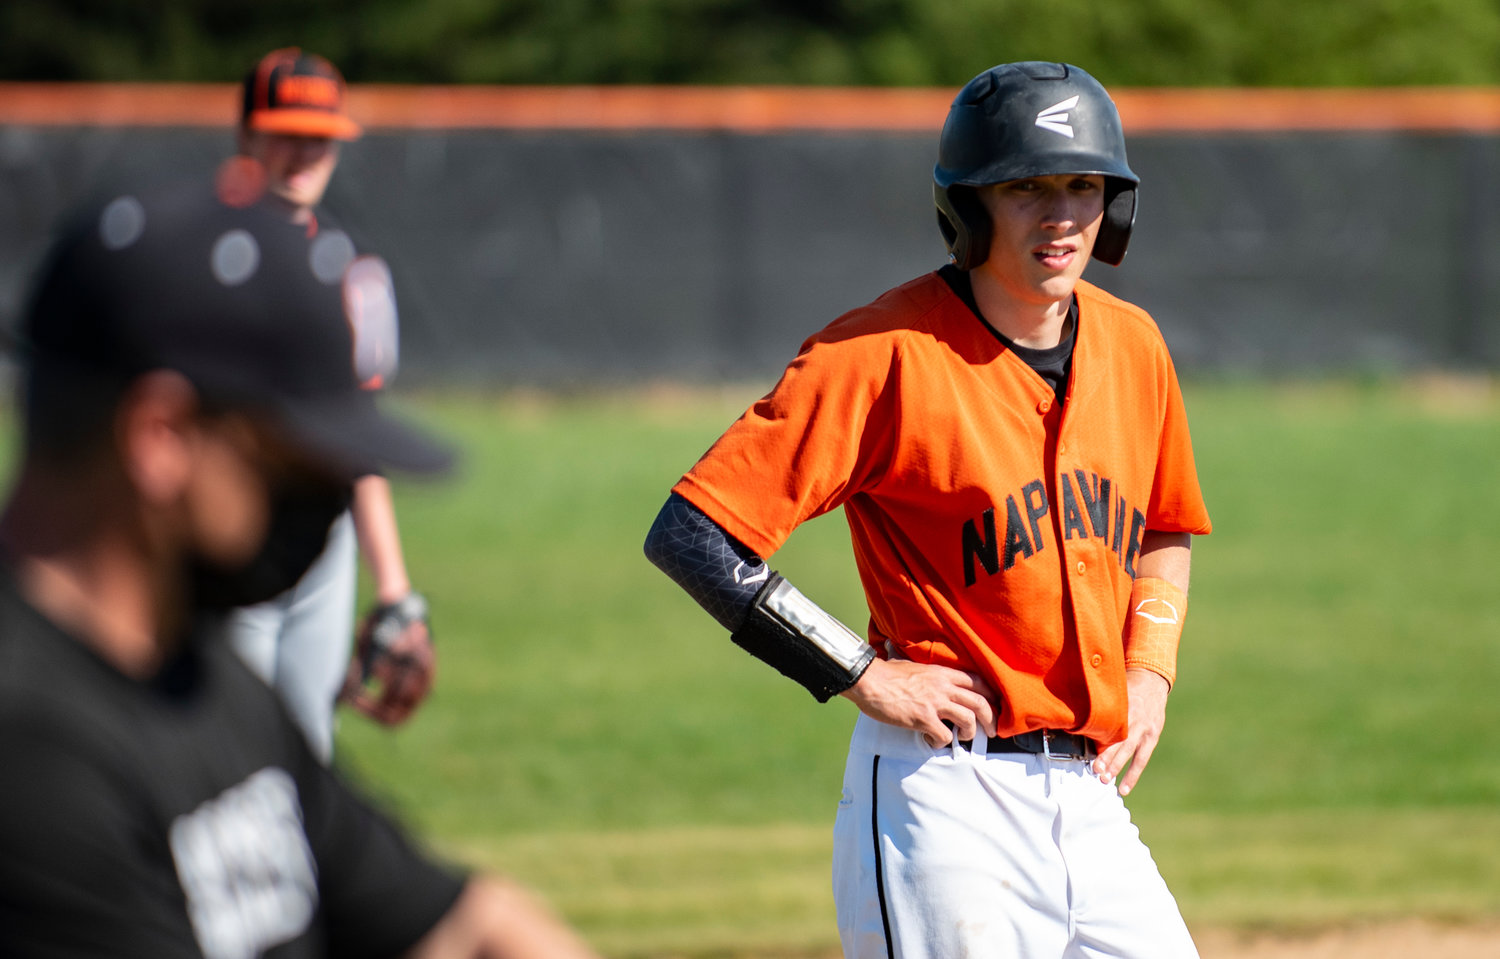 FILE PHOTO - Napavine senior Laythan Demarest was named to the all-Central 2B League first team on Sunday.